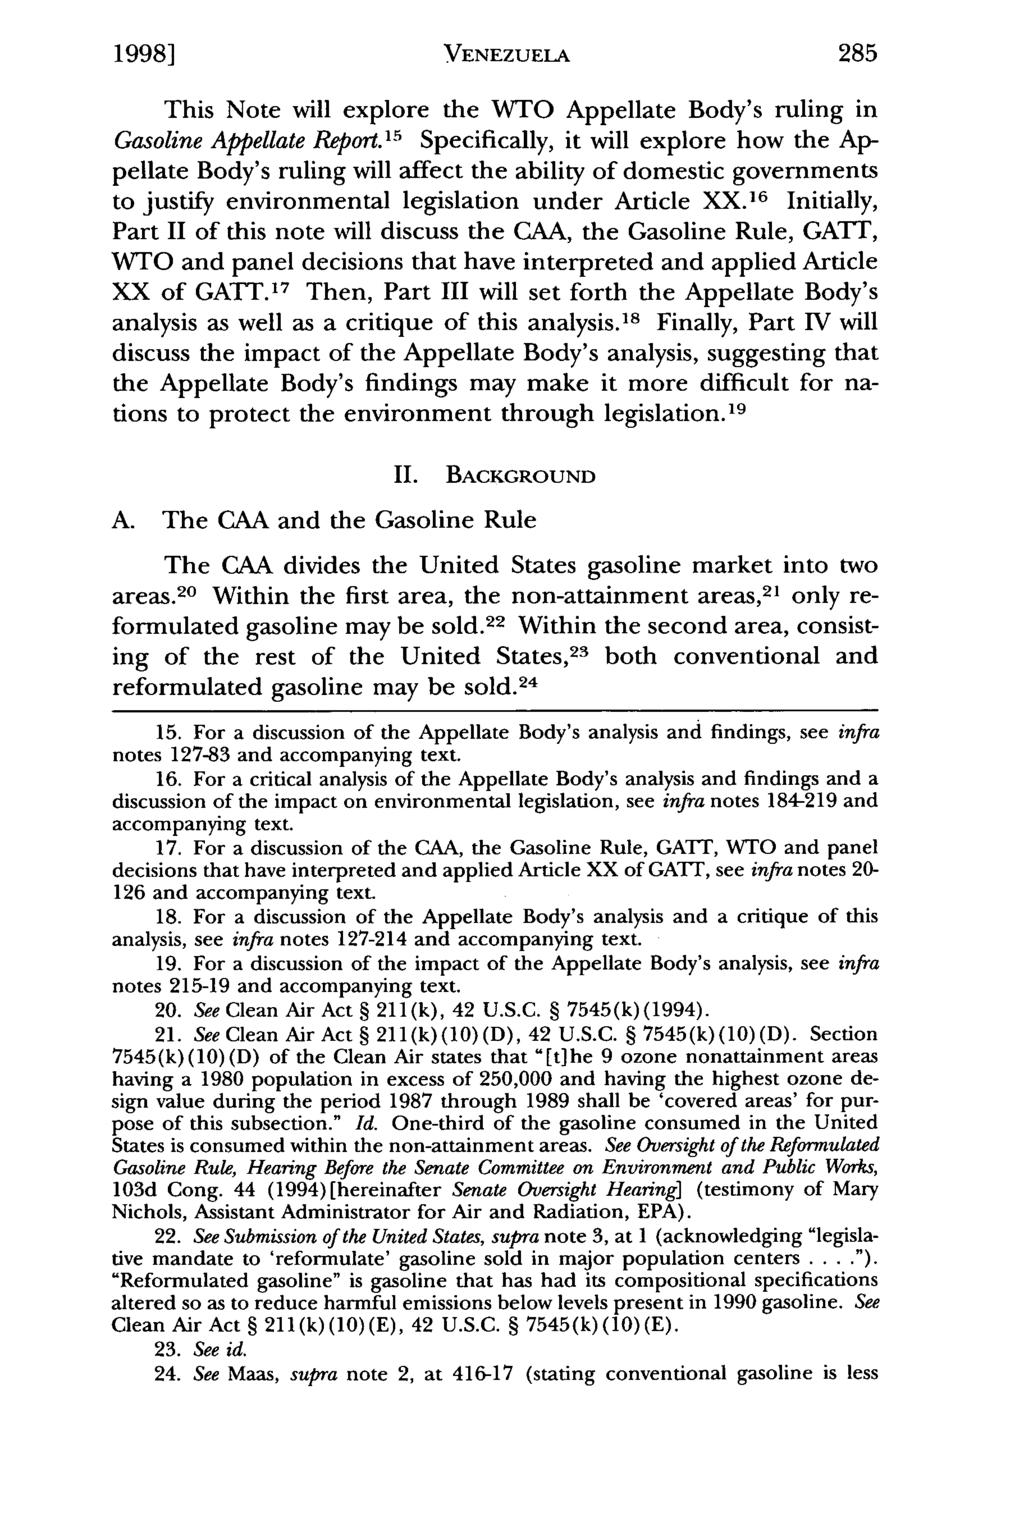 1998] Crosby: The World Trade Organization VENEZUELA Appellate Body - United States v. Ve 285 This Note will explore the WTO Appellate Body's ruling in Gasoline Appellate Report.